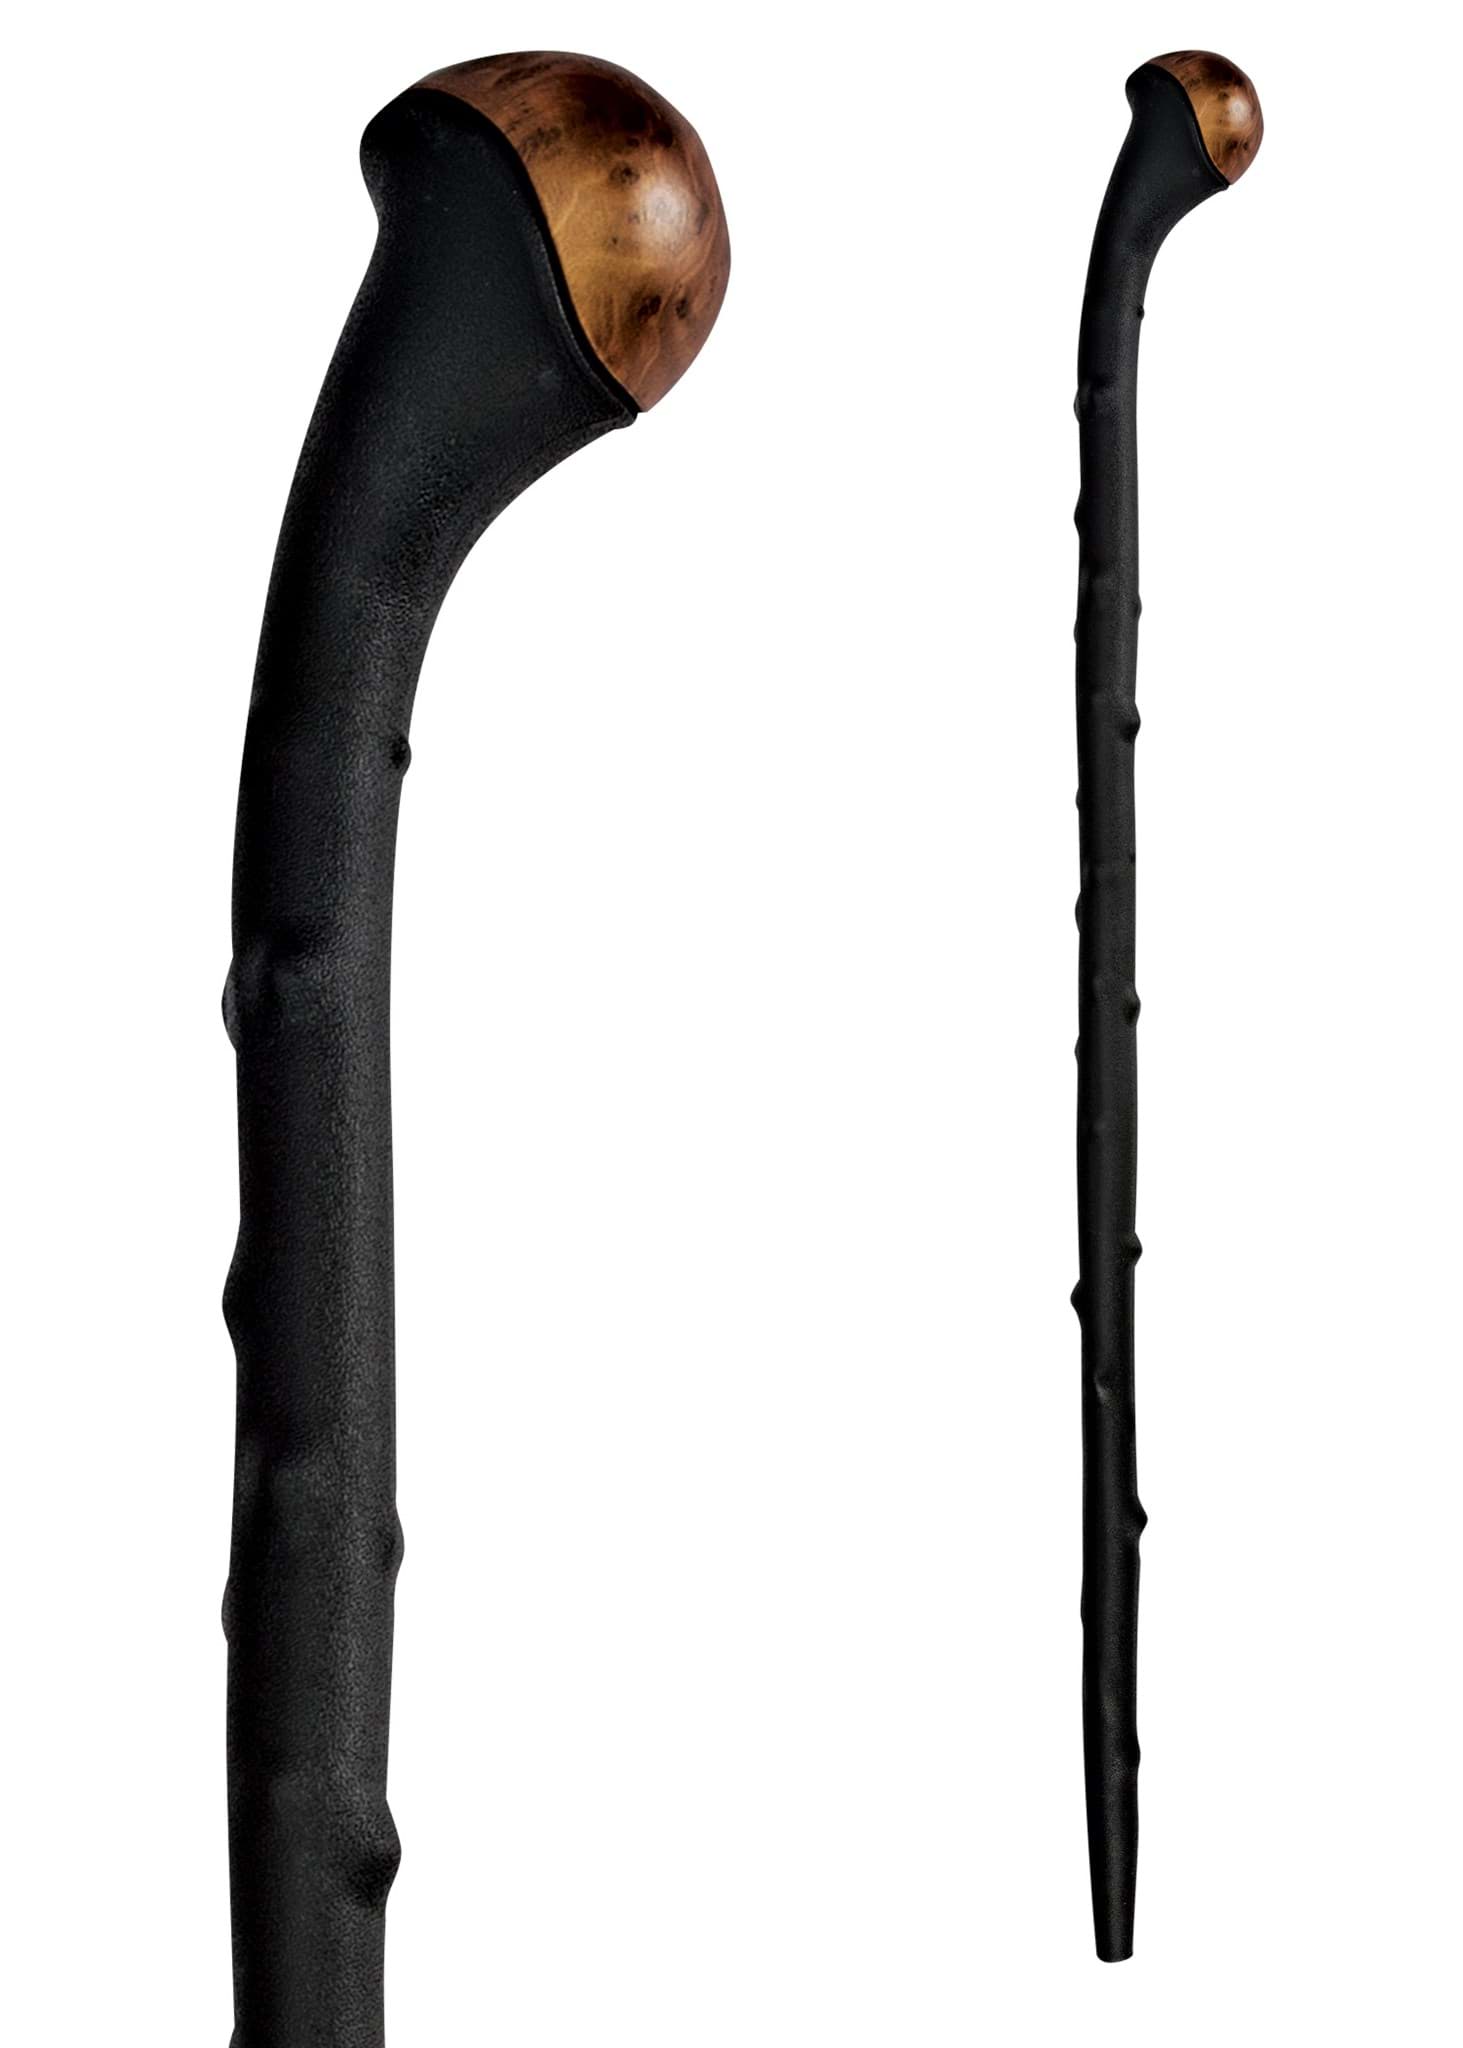 Picture of United Cutlery - Blackthorn Shillelagh Irish Walking Stick